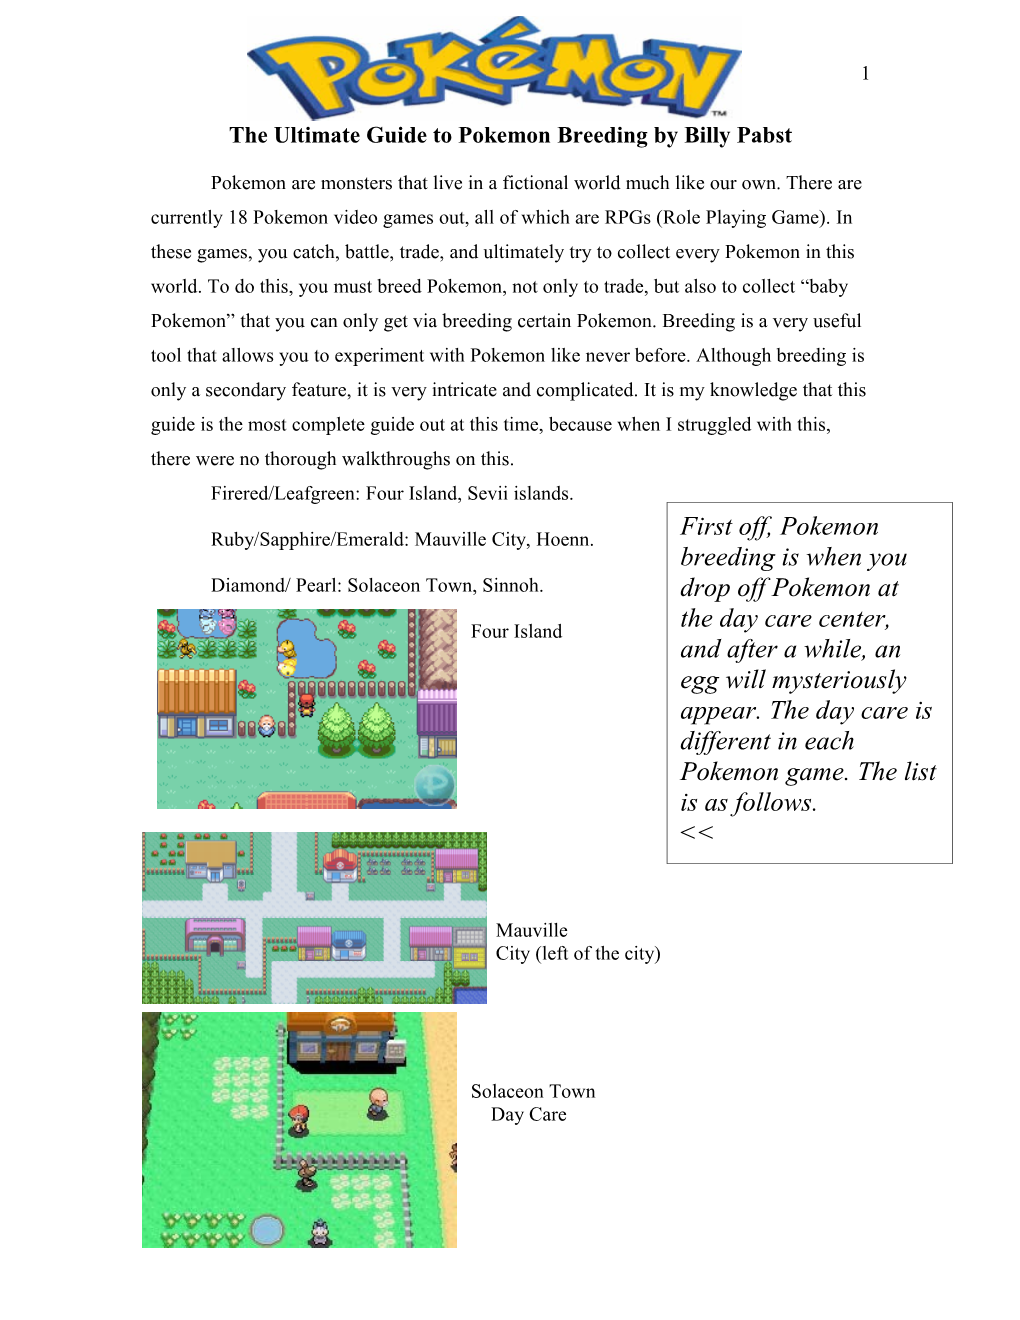 The Ultimate Guide to Pokemon Breeding